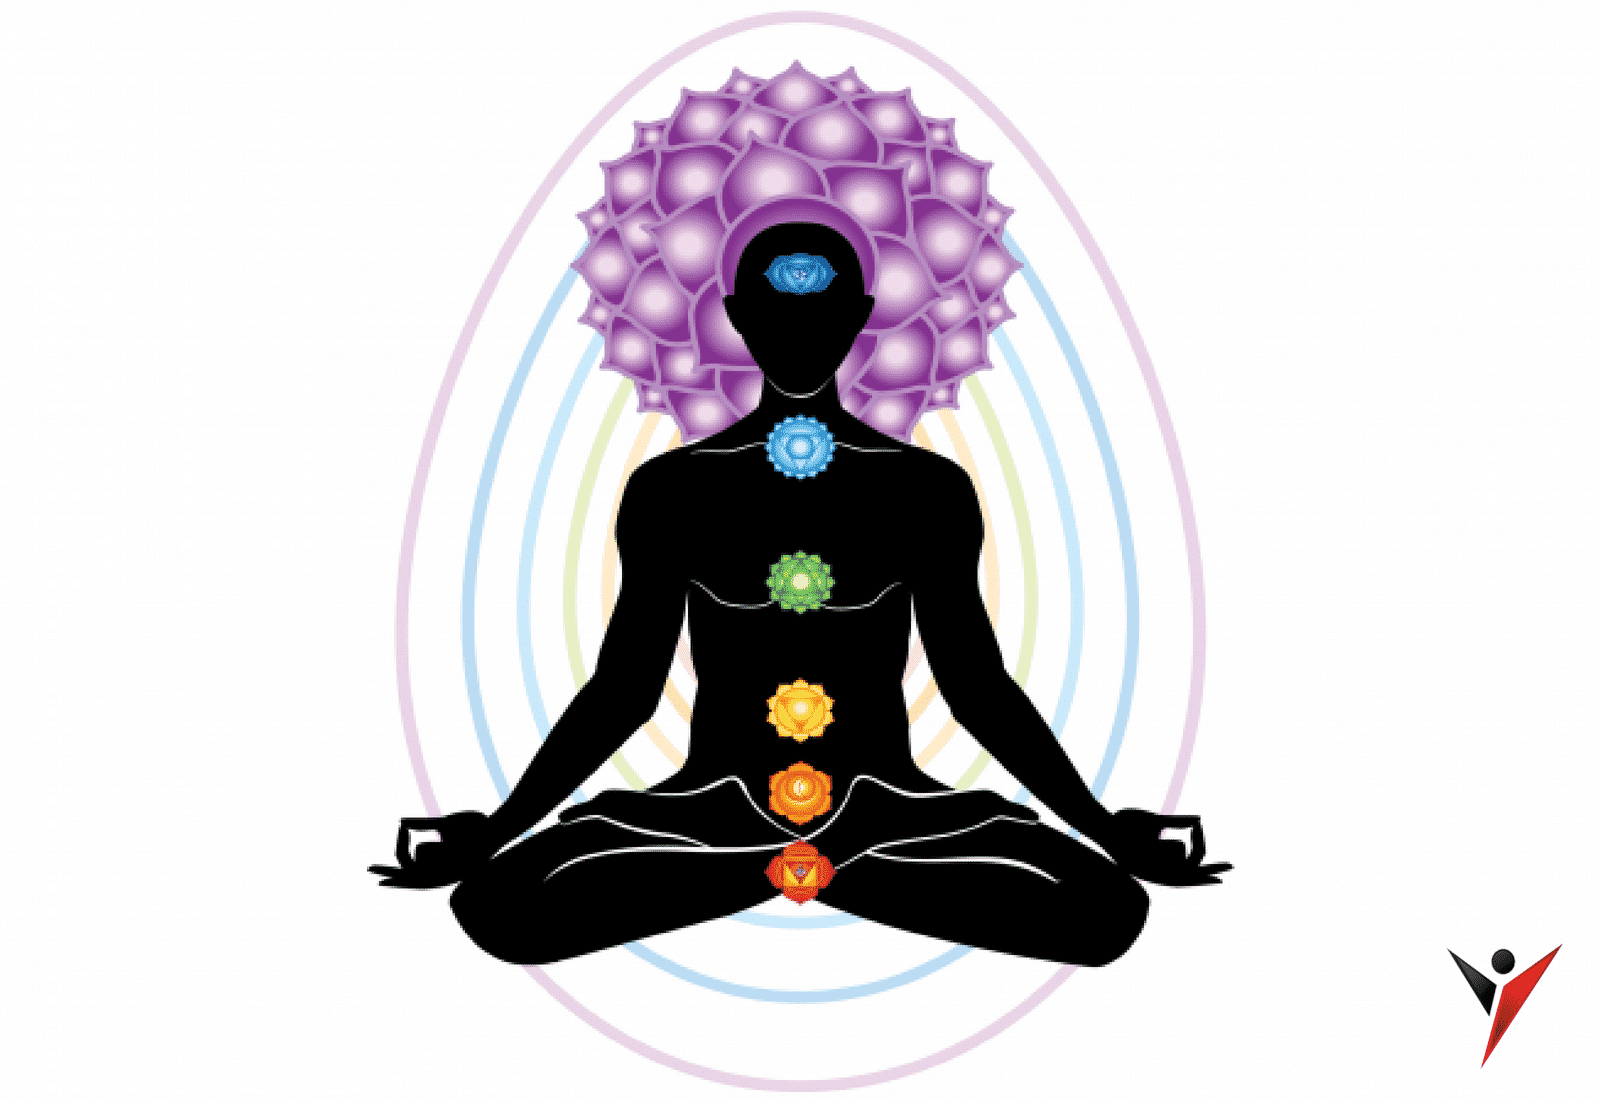 What are the 7 Chakras of Kundalini Yoga? - The Yoga Institute